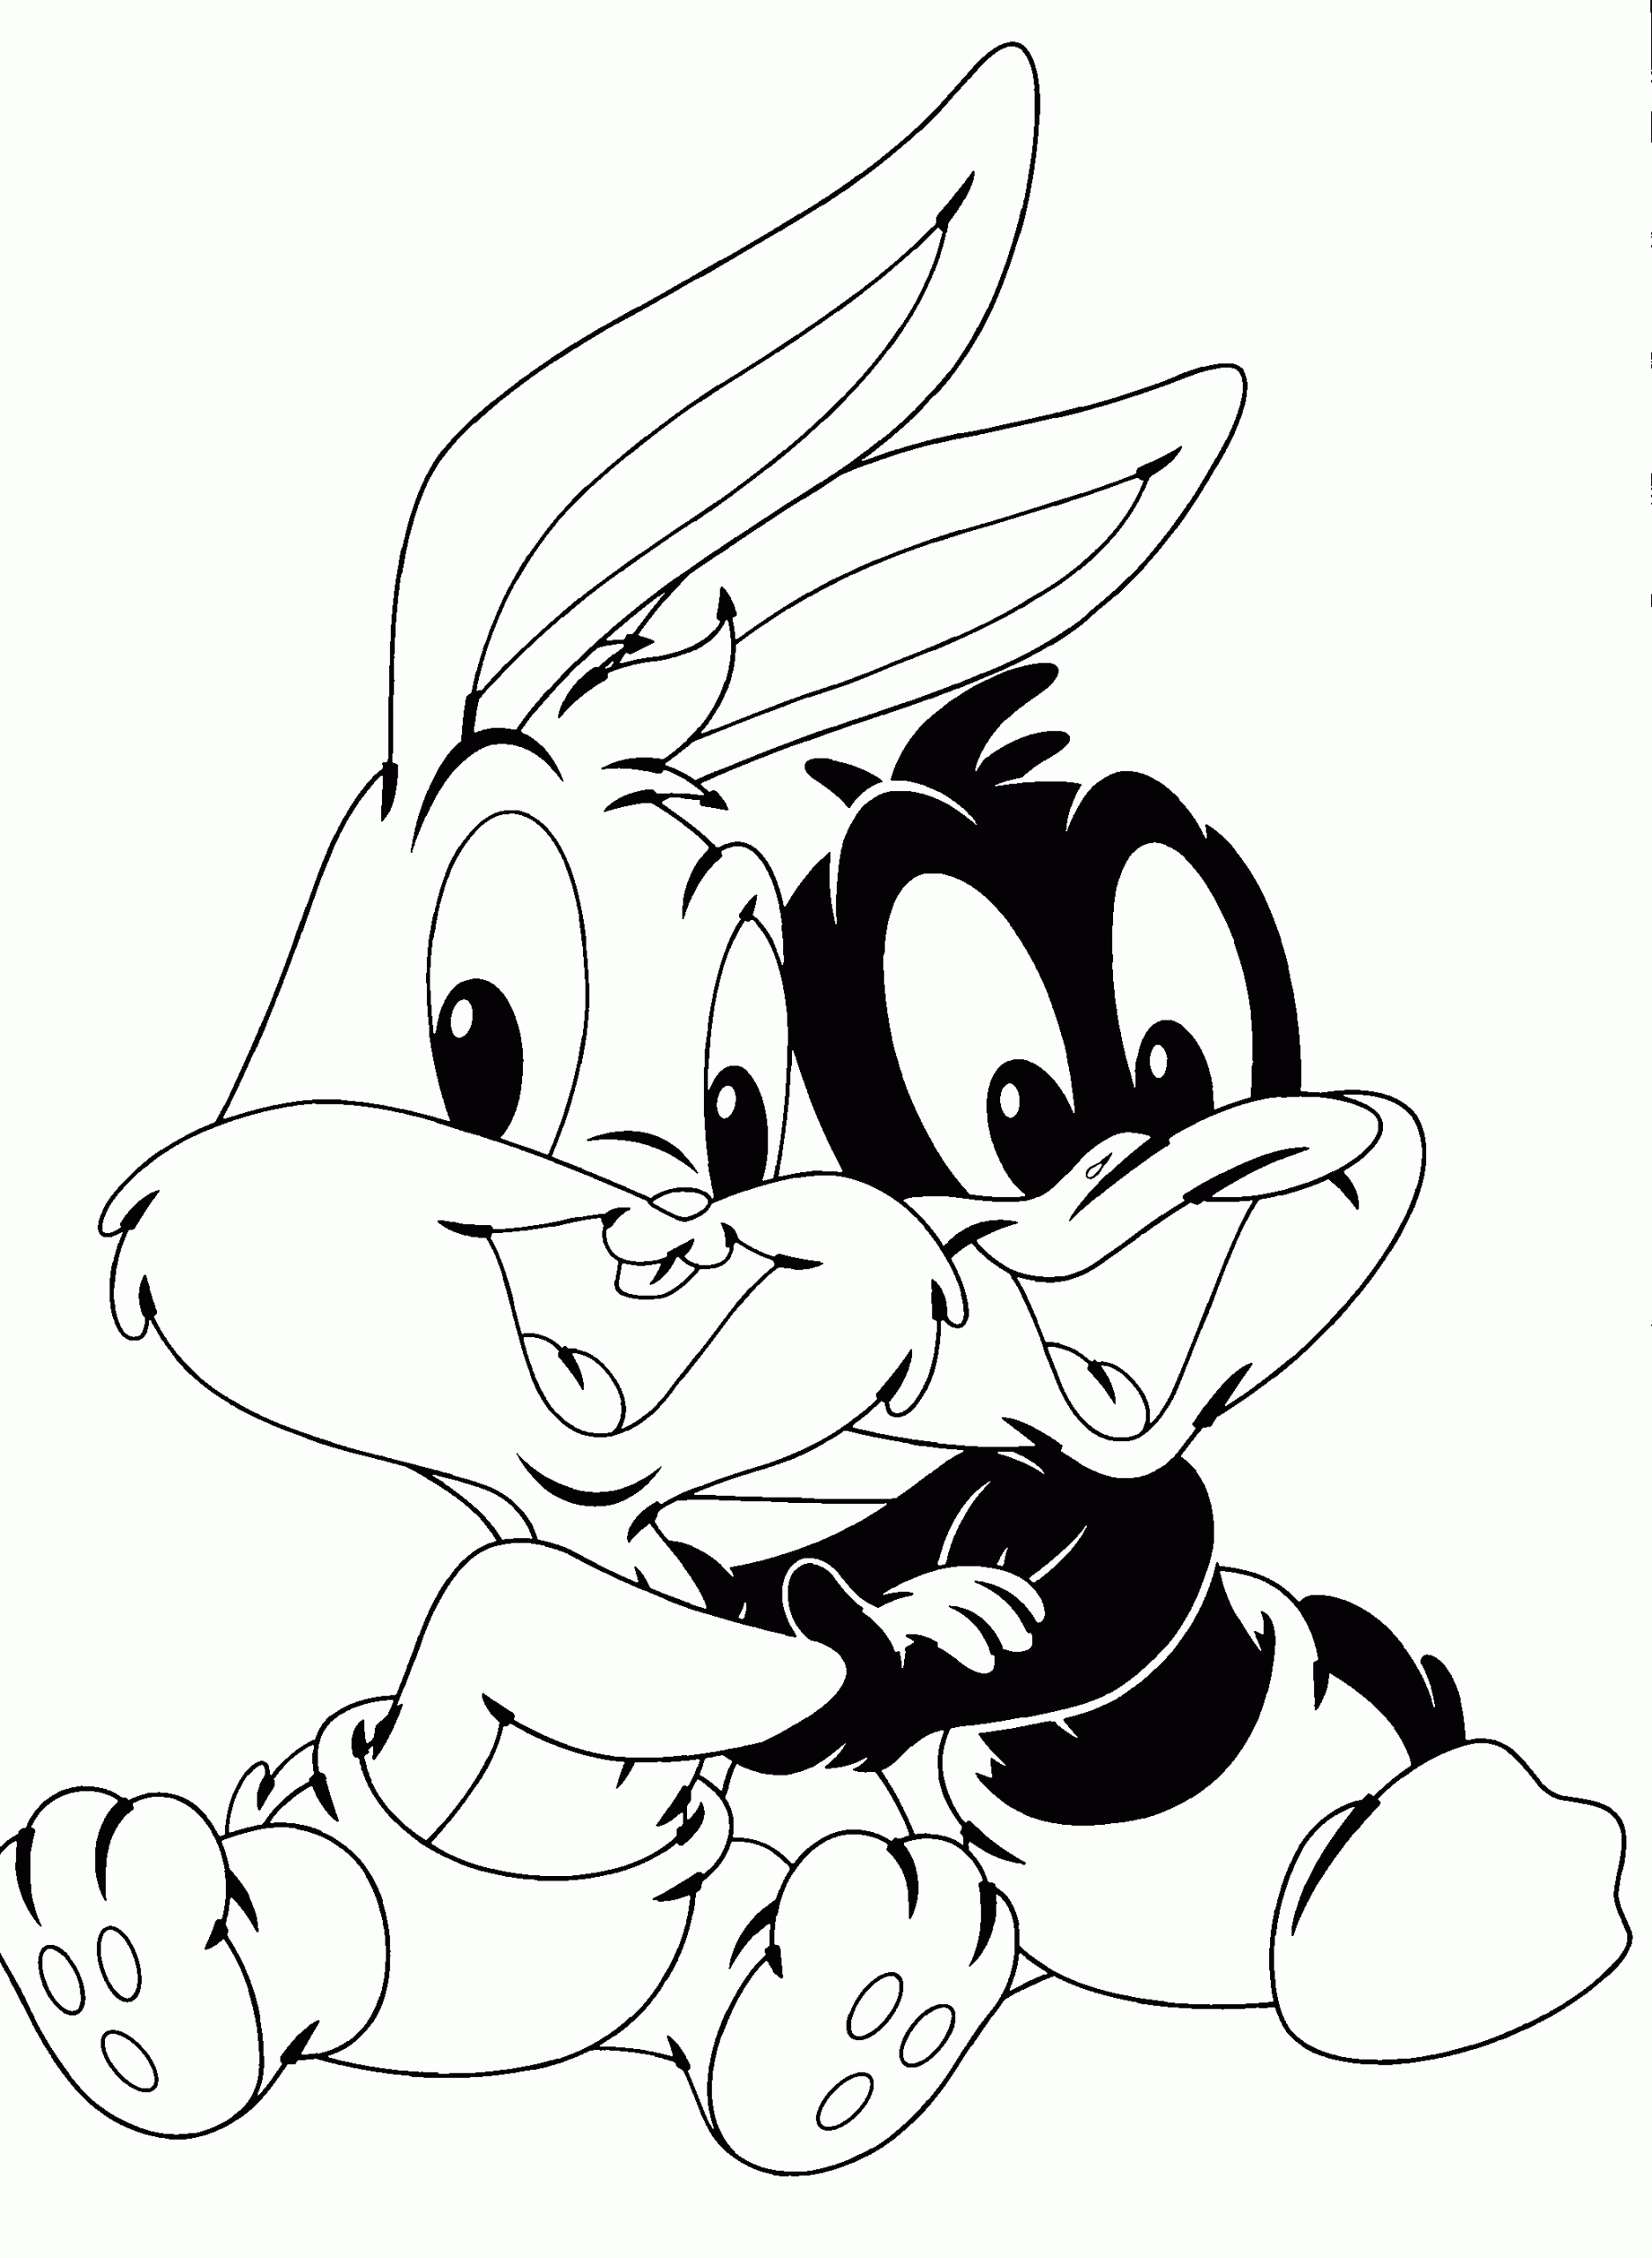 Coloring Pages Bugs Bunny Coloring Pages Free Page Download - Free Printable Bugs Bunny Coloring Pages